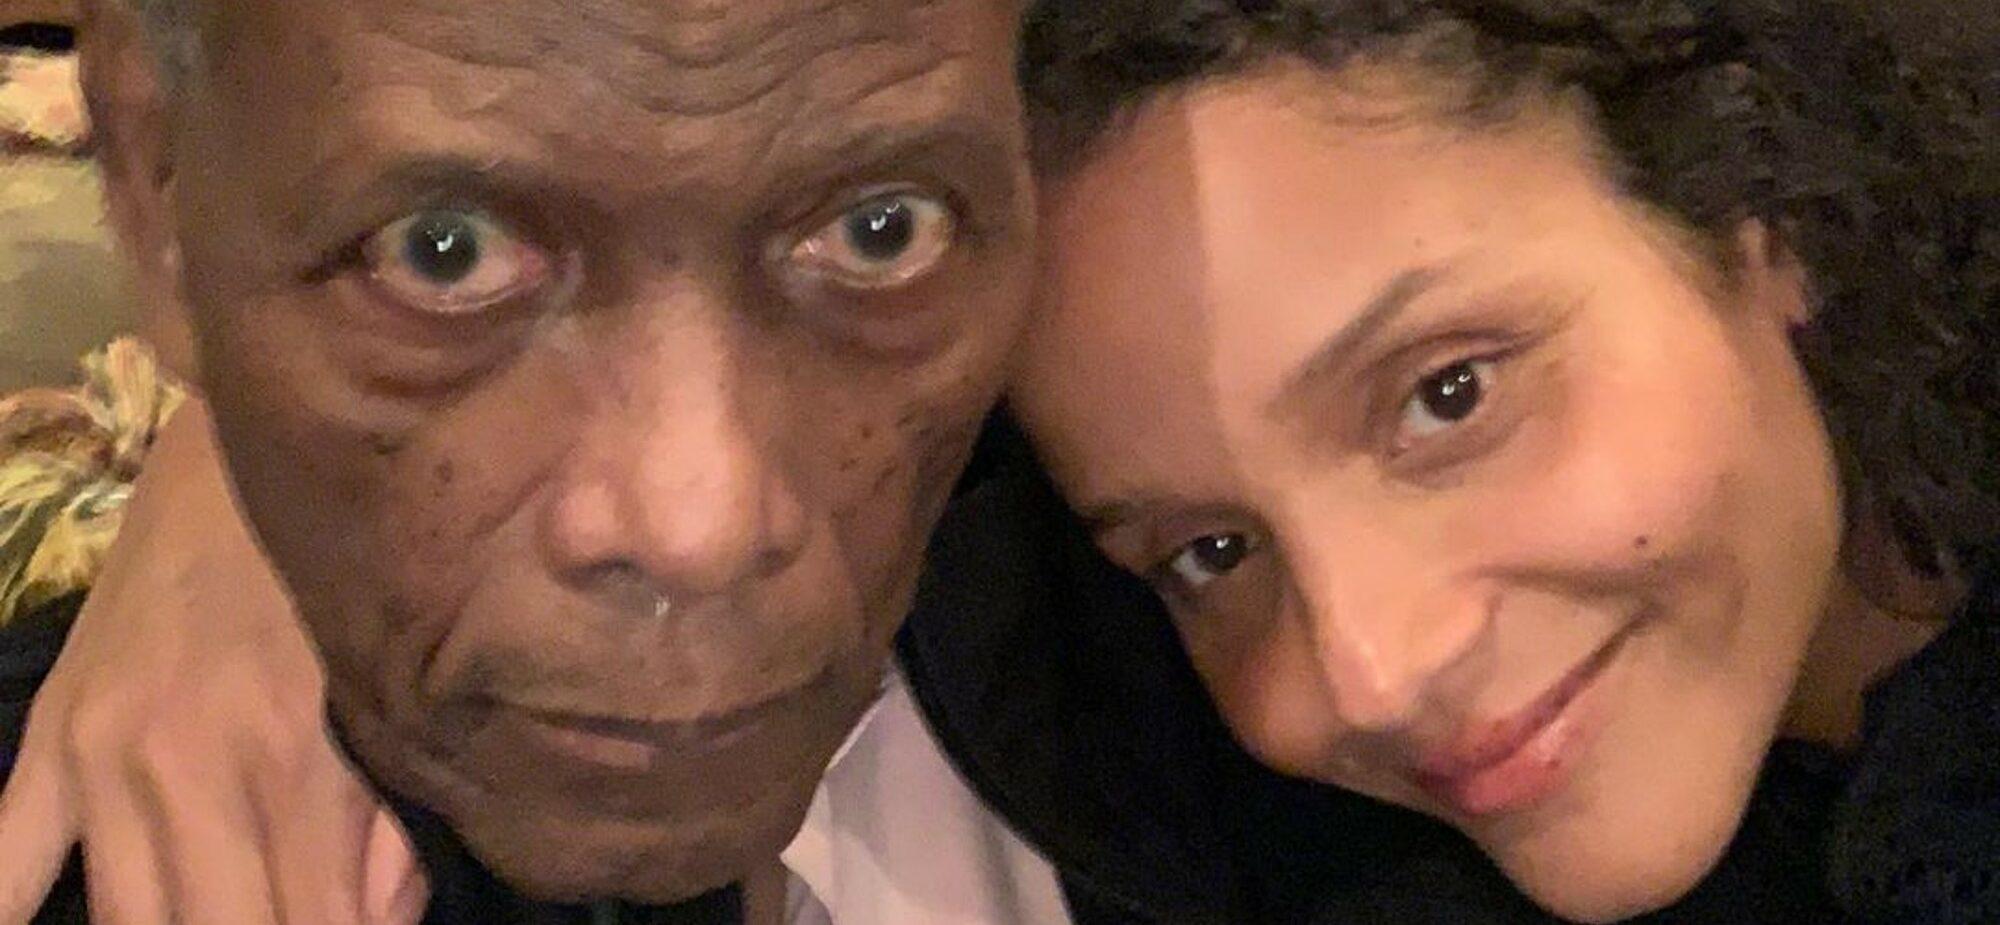 Sydney Poitier Says ‘Pain Of Losing’ Famous Dad Is ‘Unbearable’ In Tribute